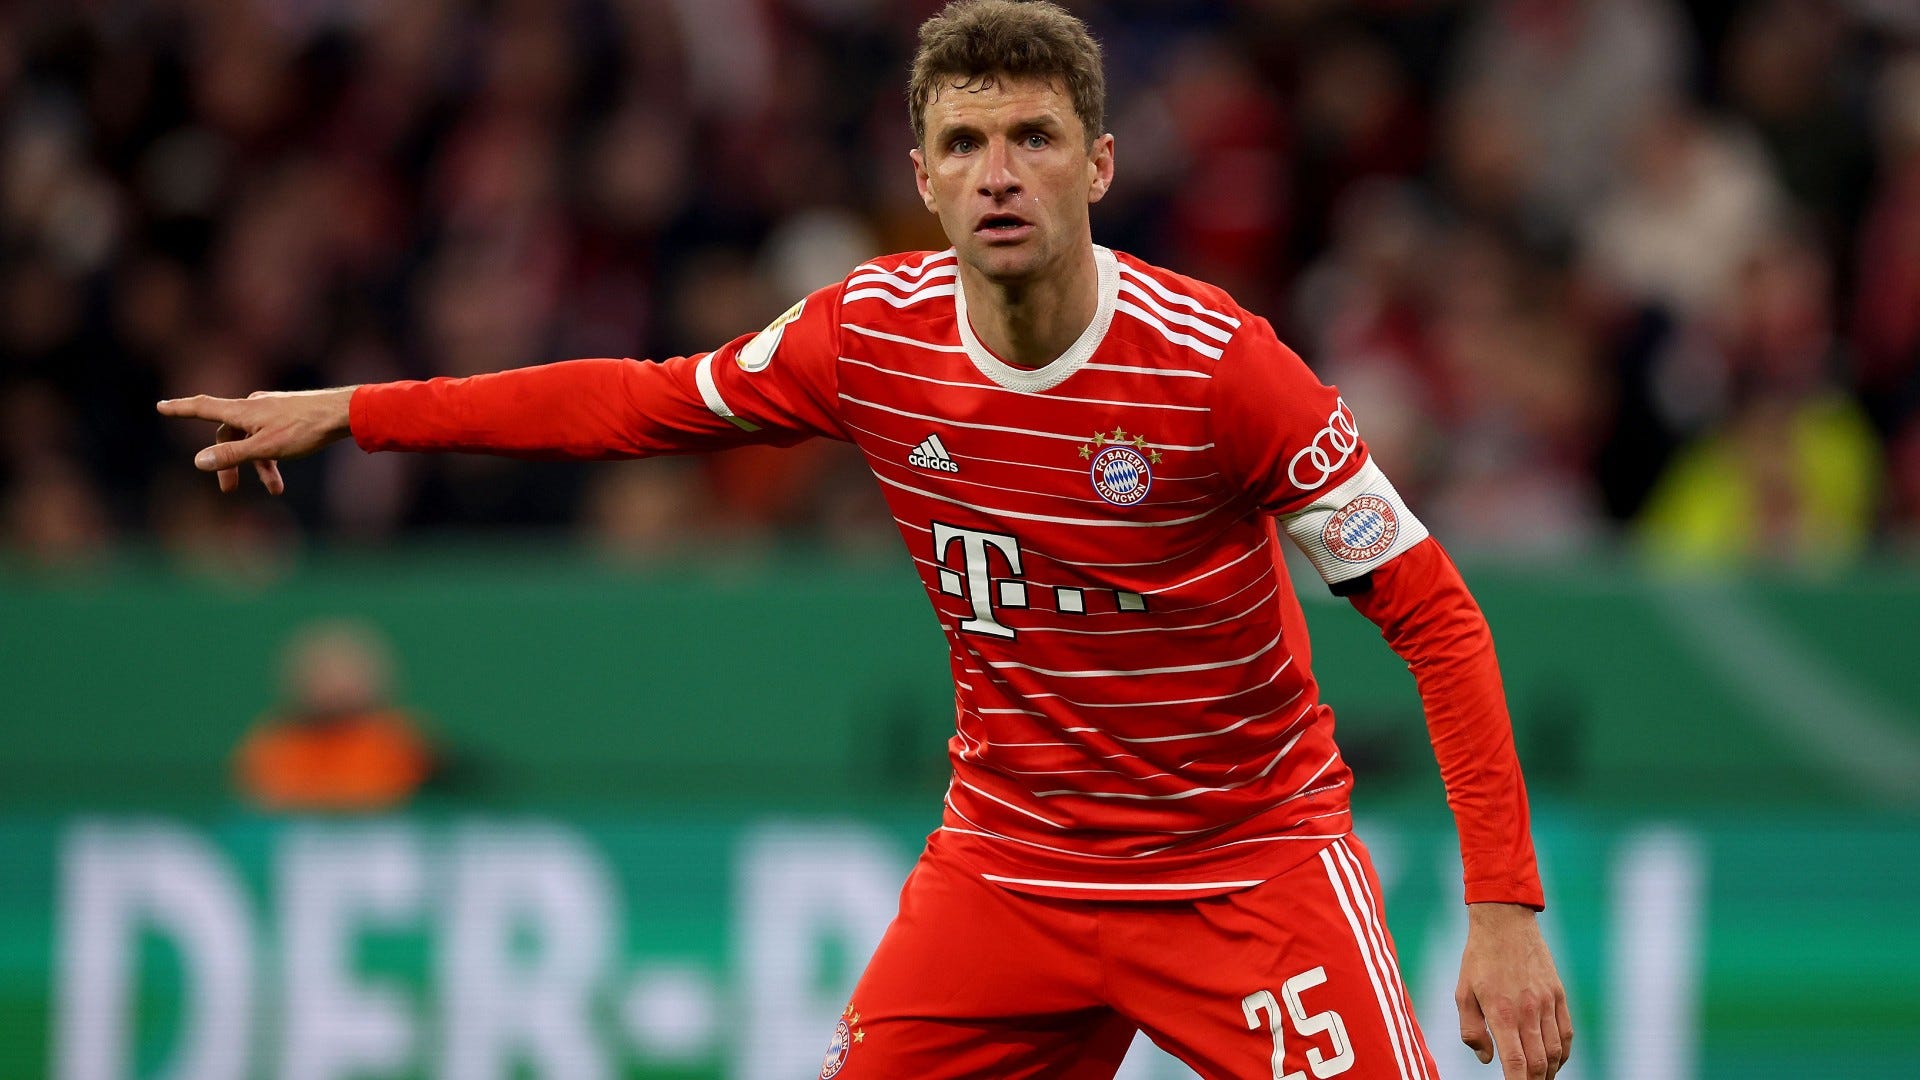 Bayern Munich vs Hoffenheim Where to watch the match online, live stream, TV channels and kick-off time Goal US